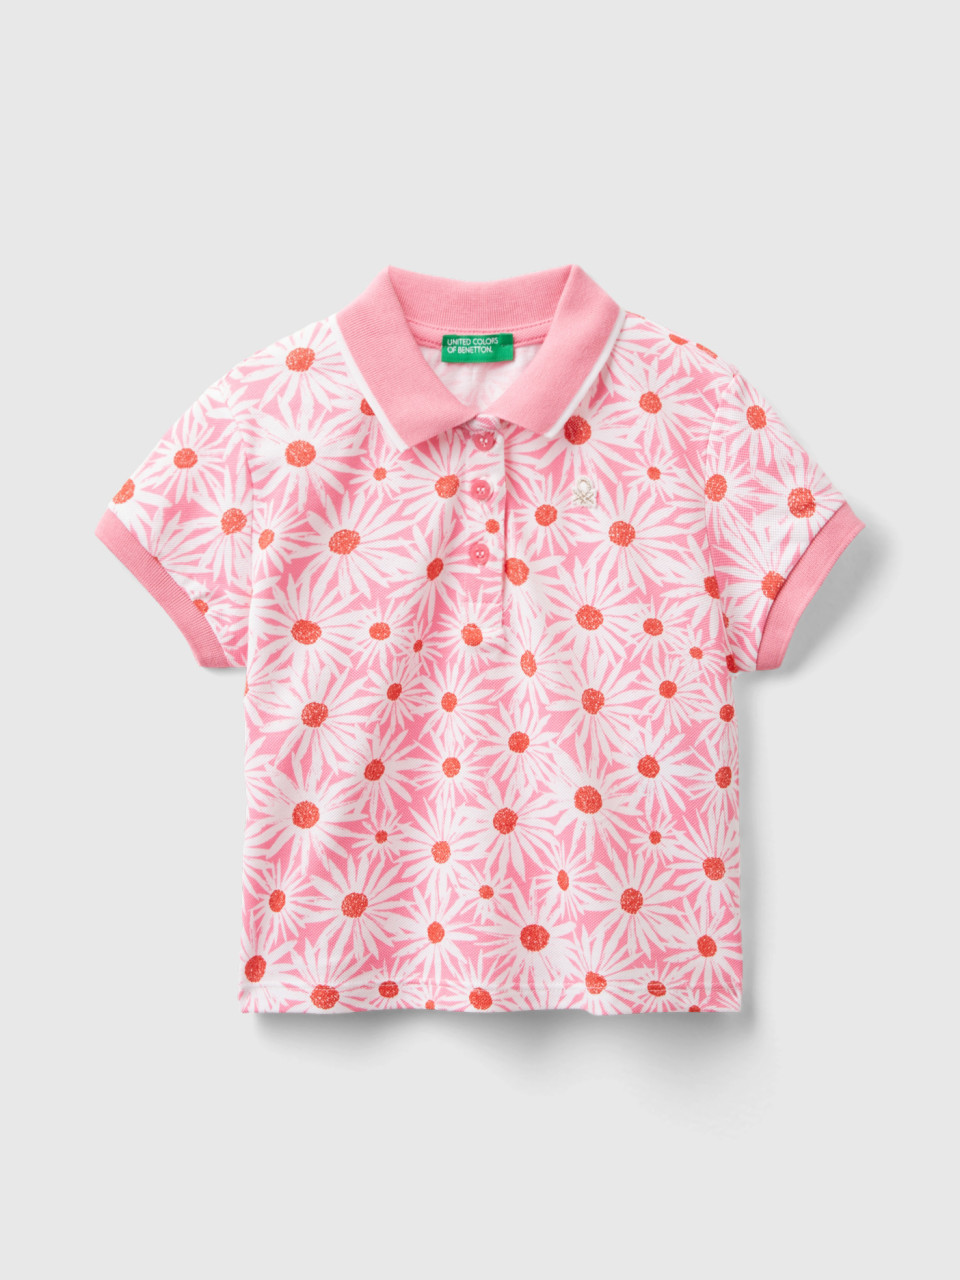 Benetton, Pink Polo Shirt With Floral Print, Pink, Kids